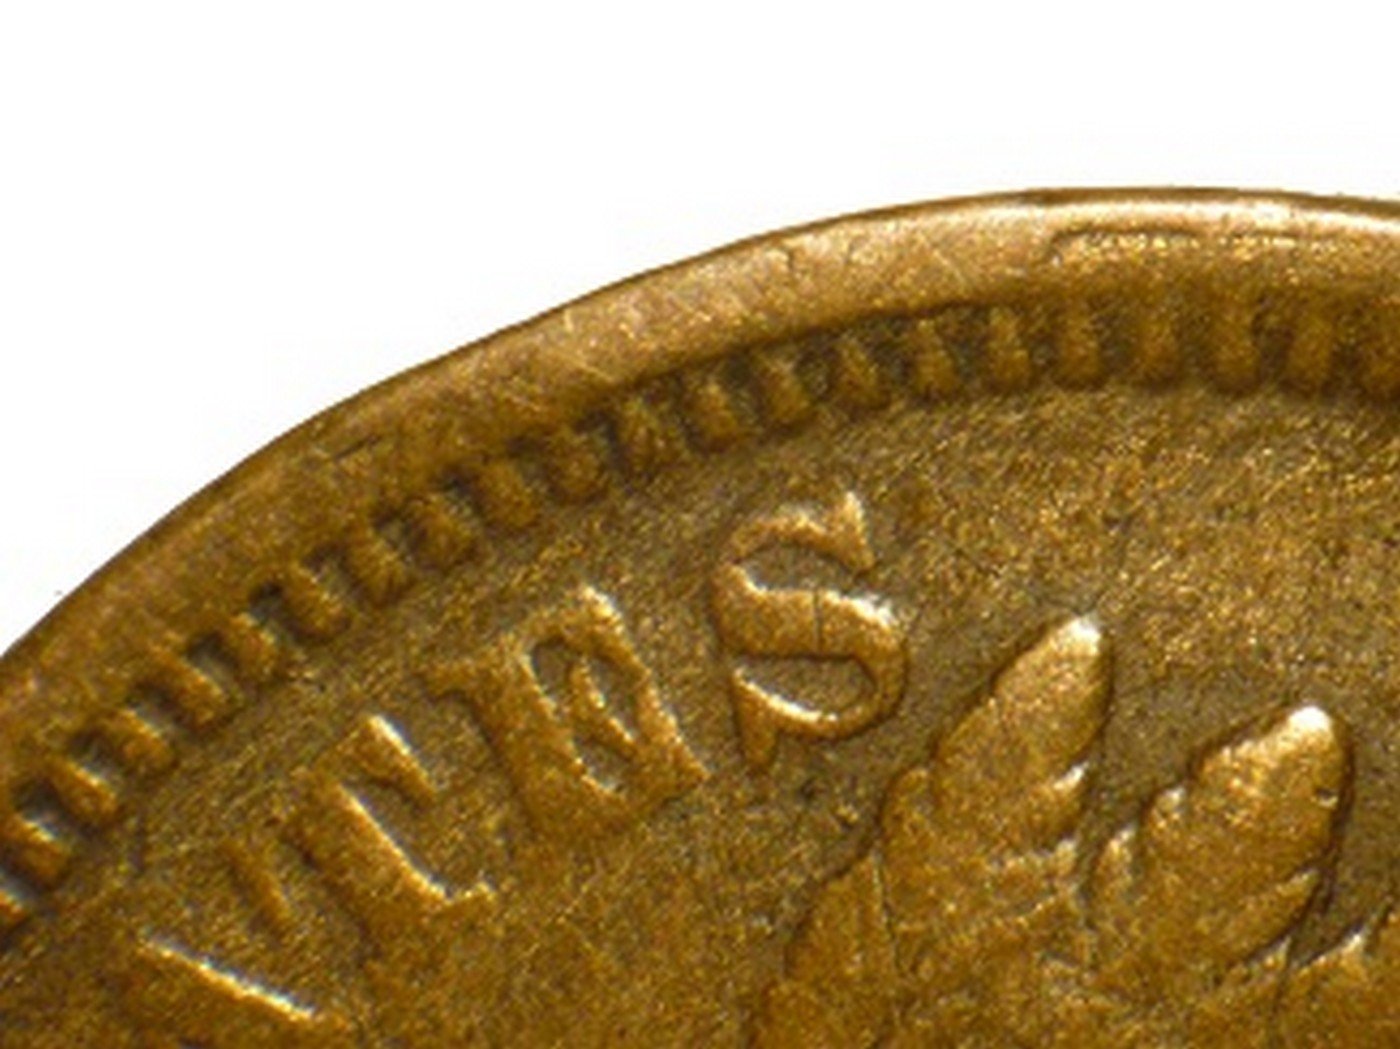 1867 RPD-003 - Indian Head Penny - Photo by David Poliquin